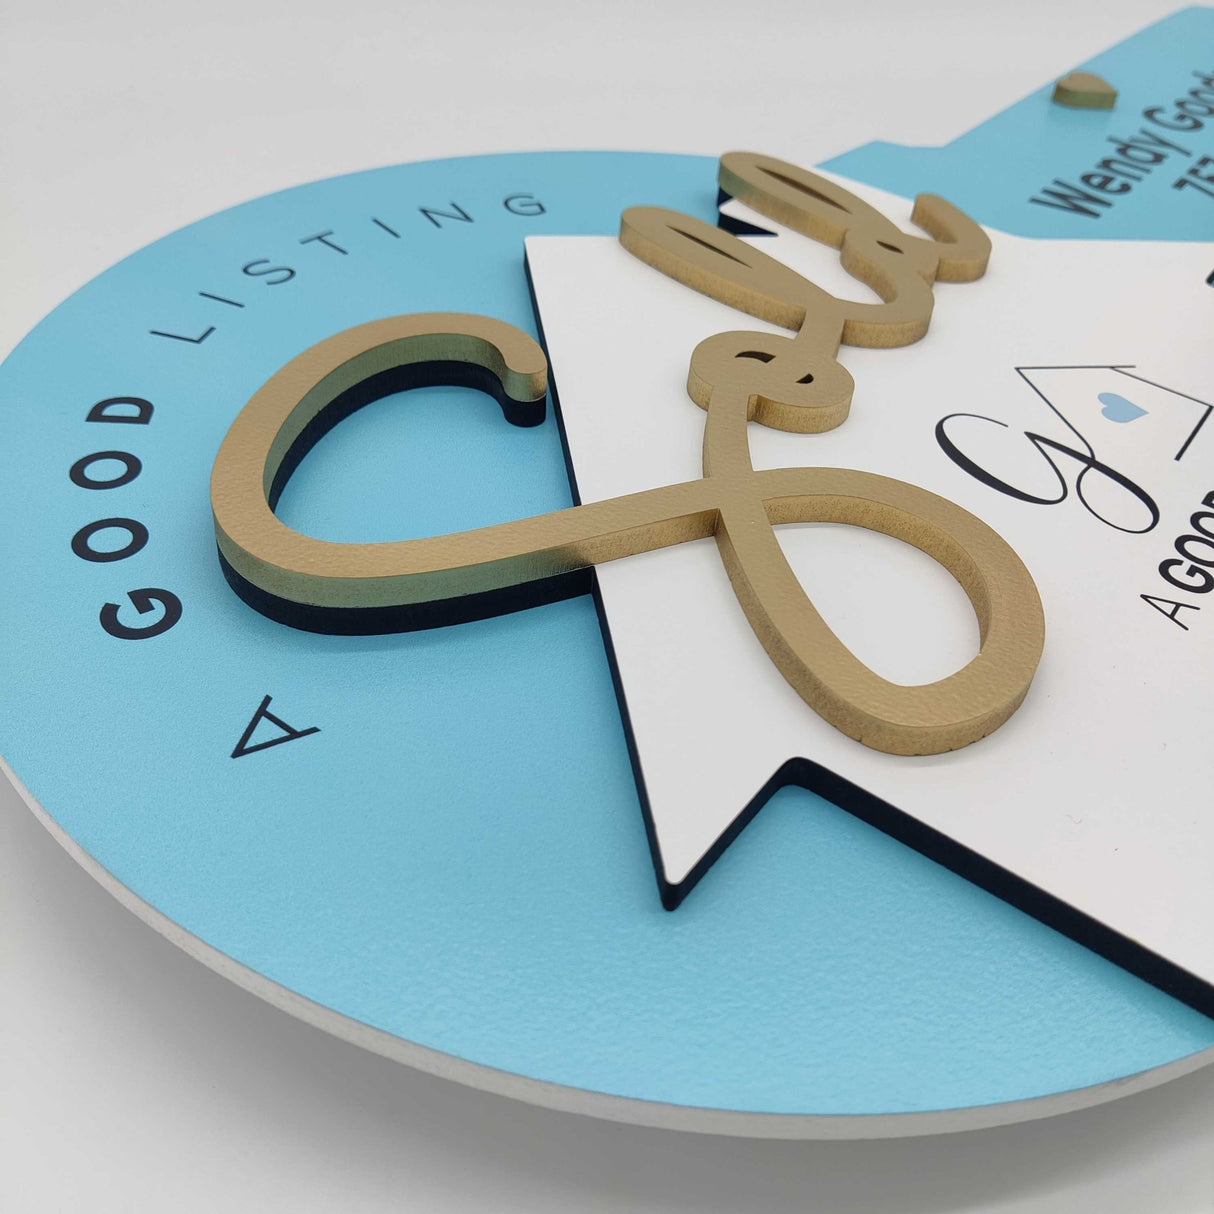 Round Shaped «Sold» Tiffany Blue Realtor Sign - Real Estate Store